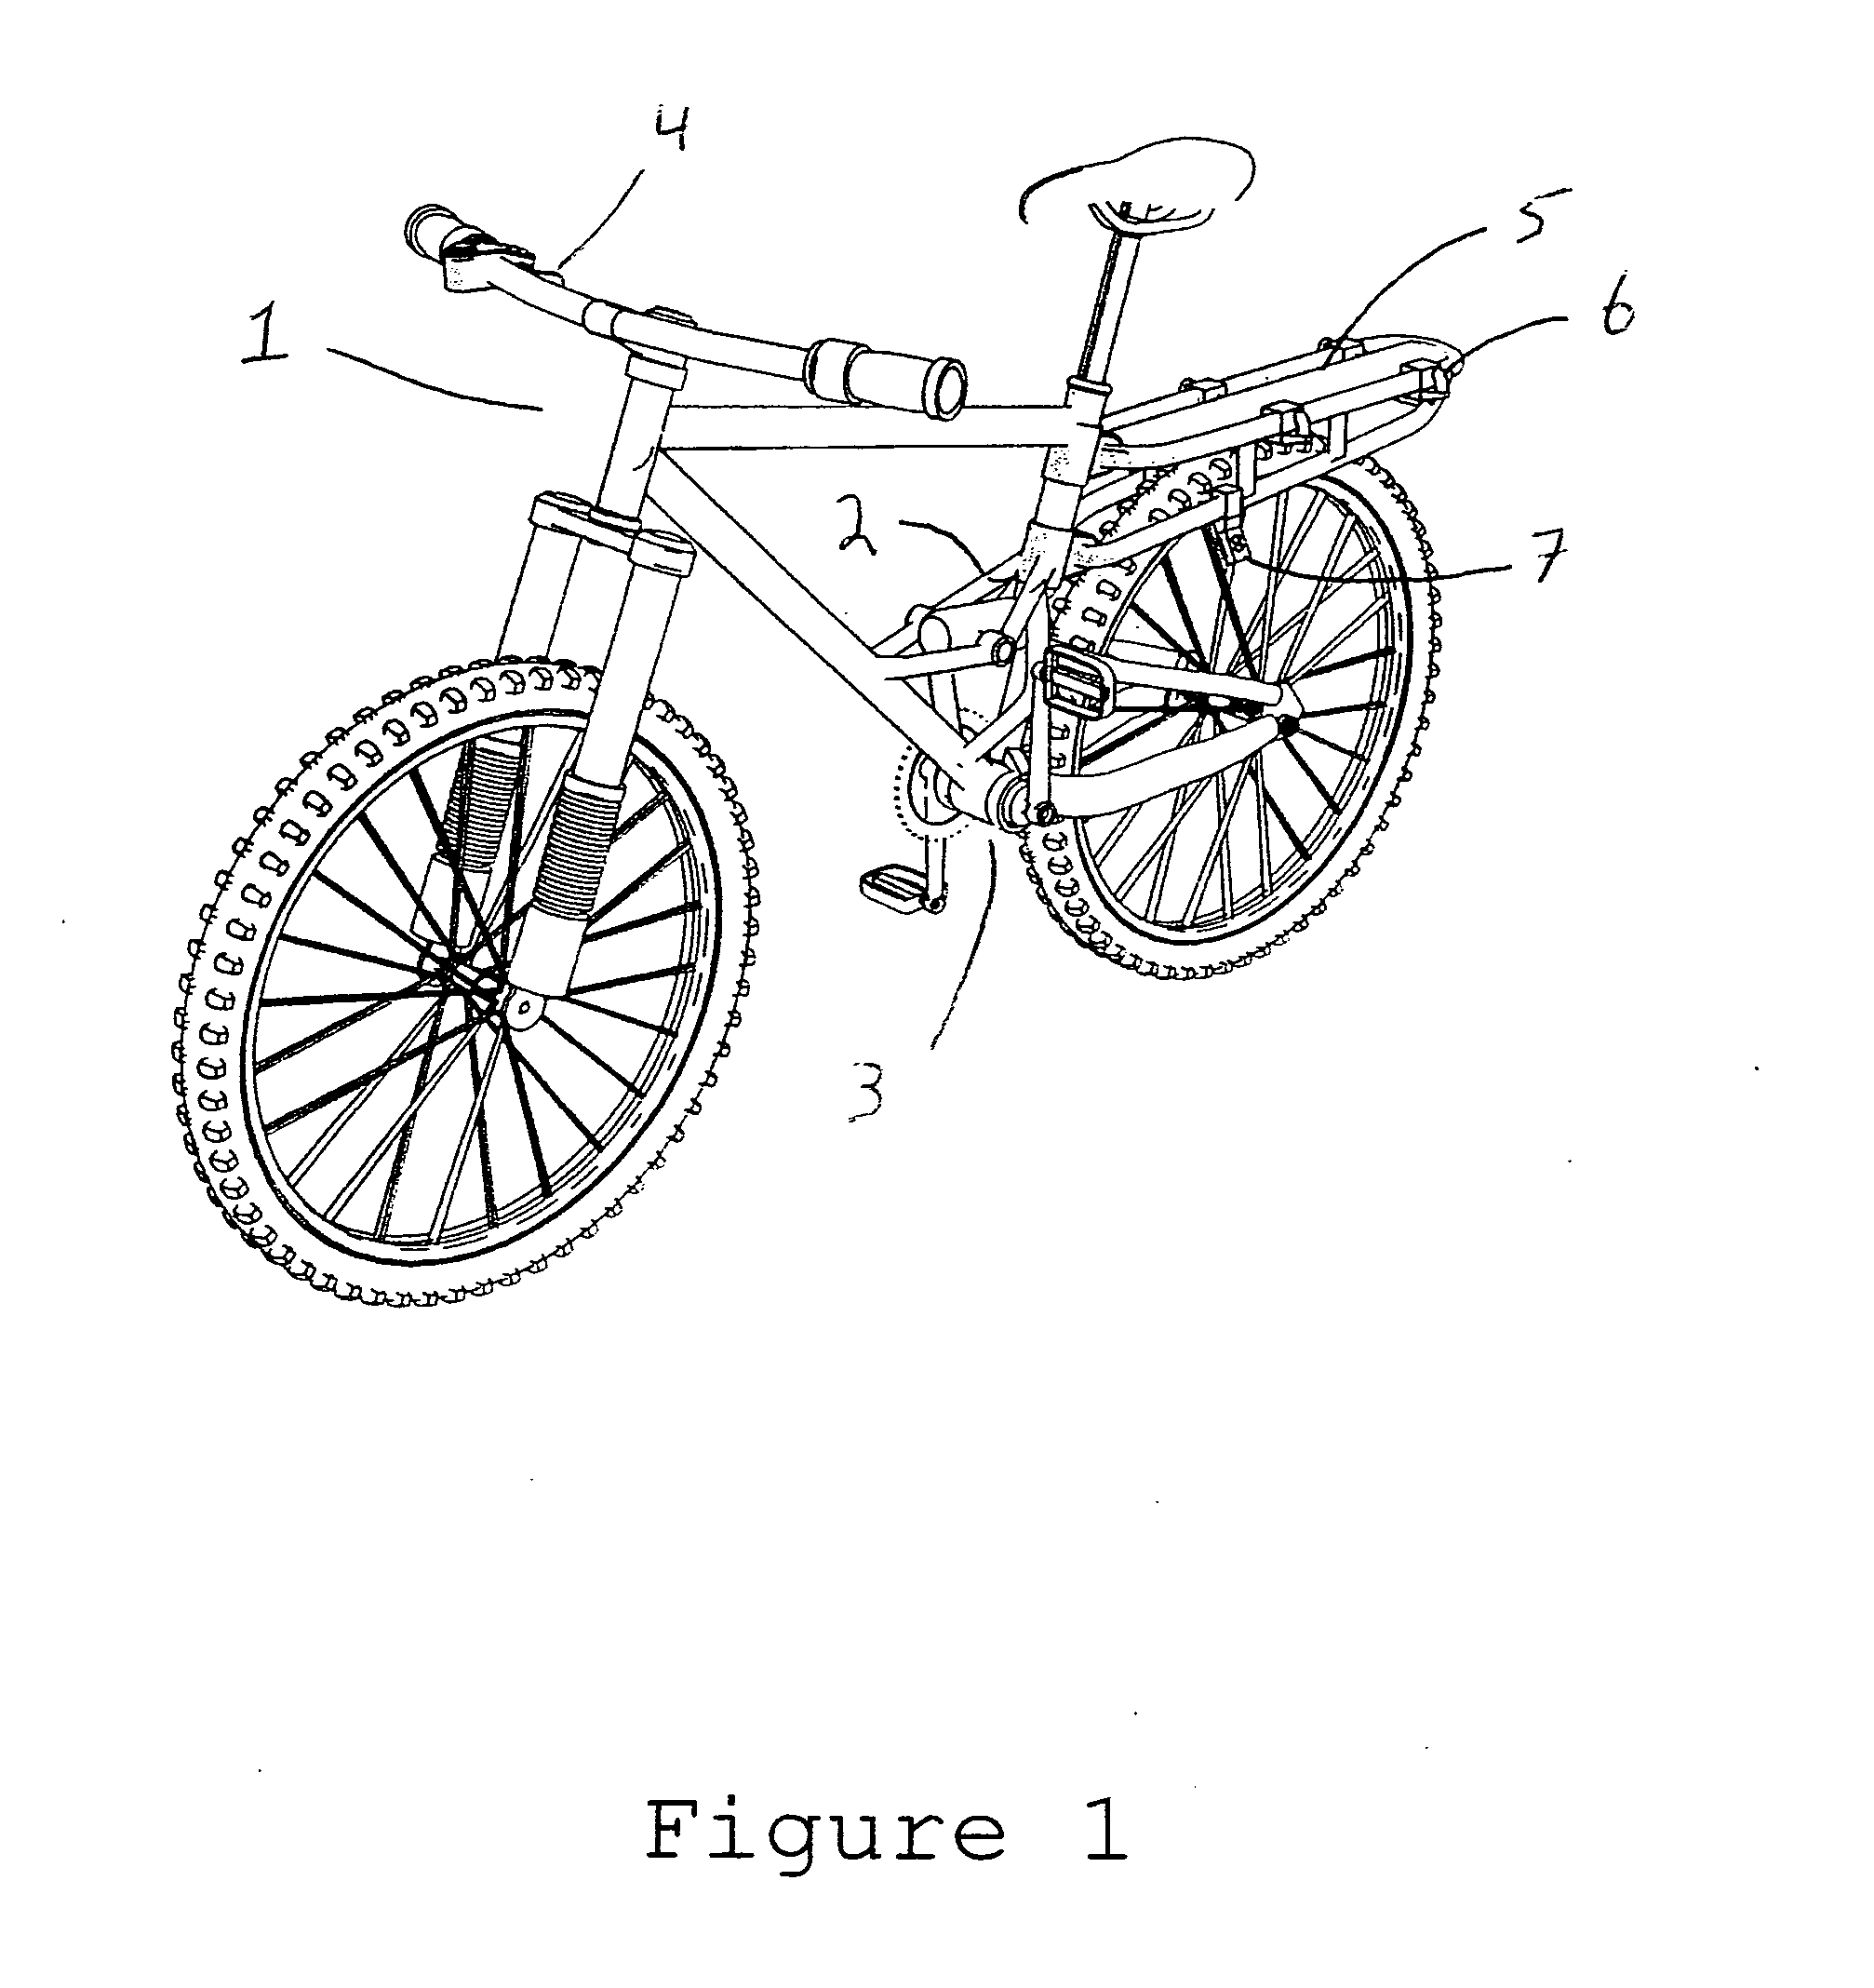 Bicycle with optional power assist